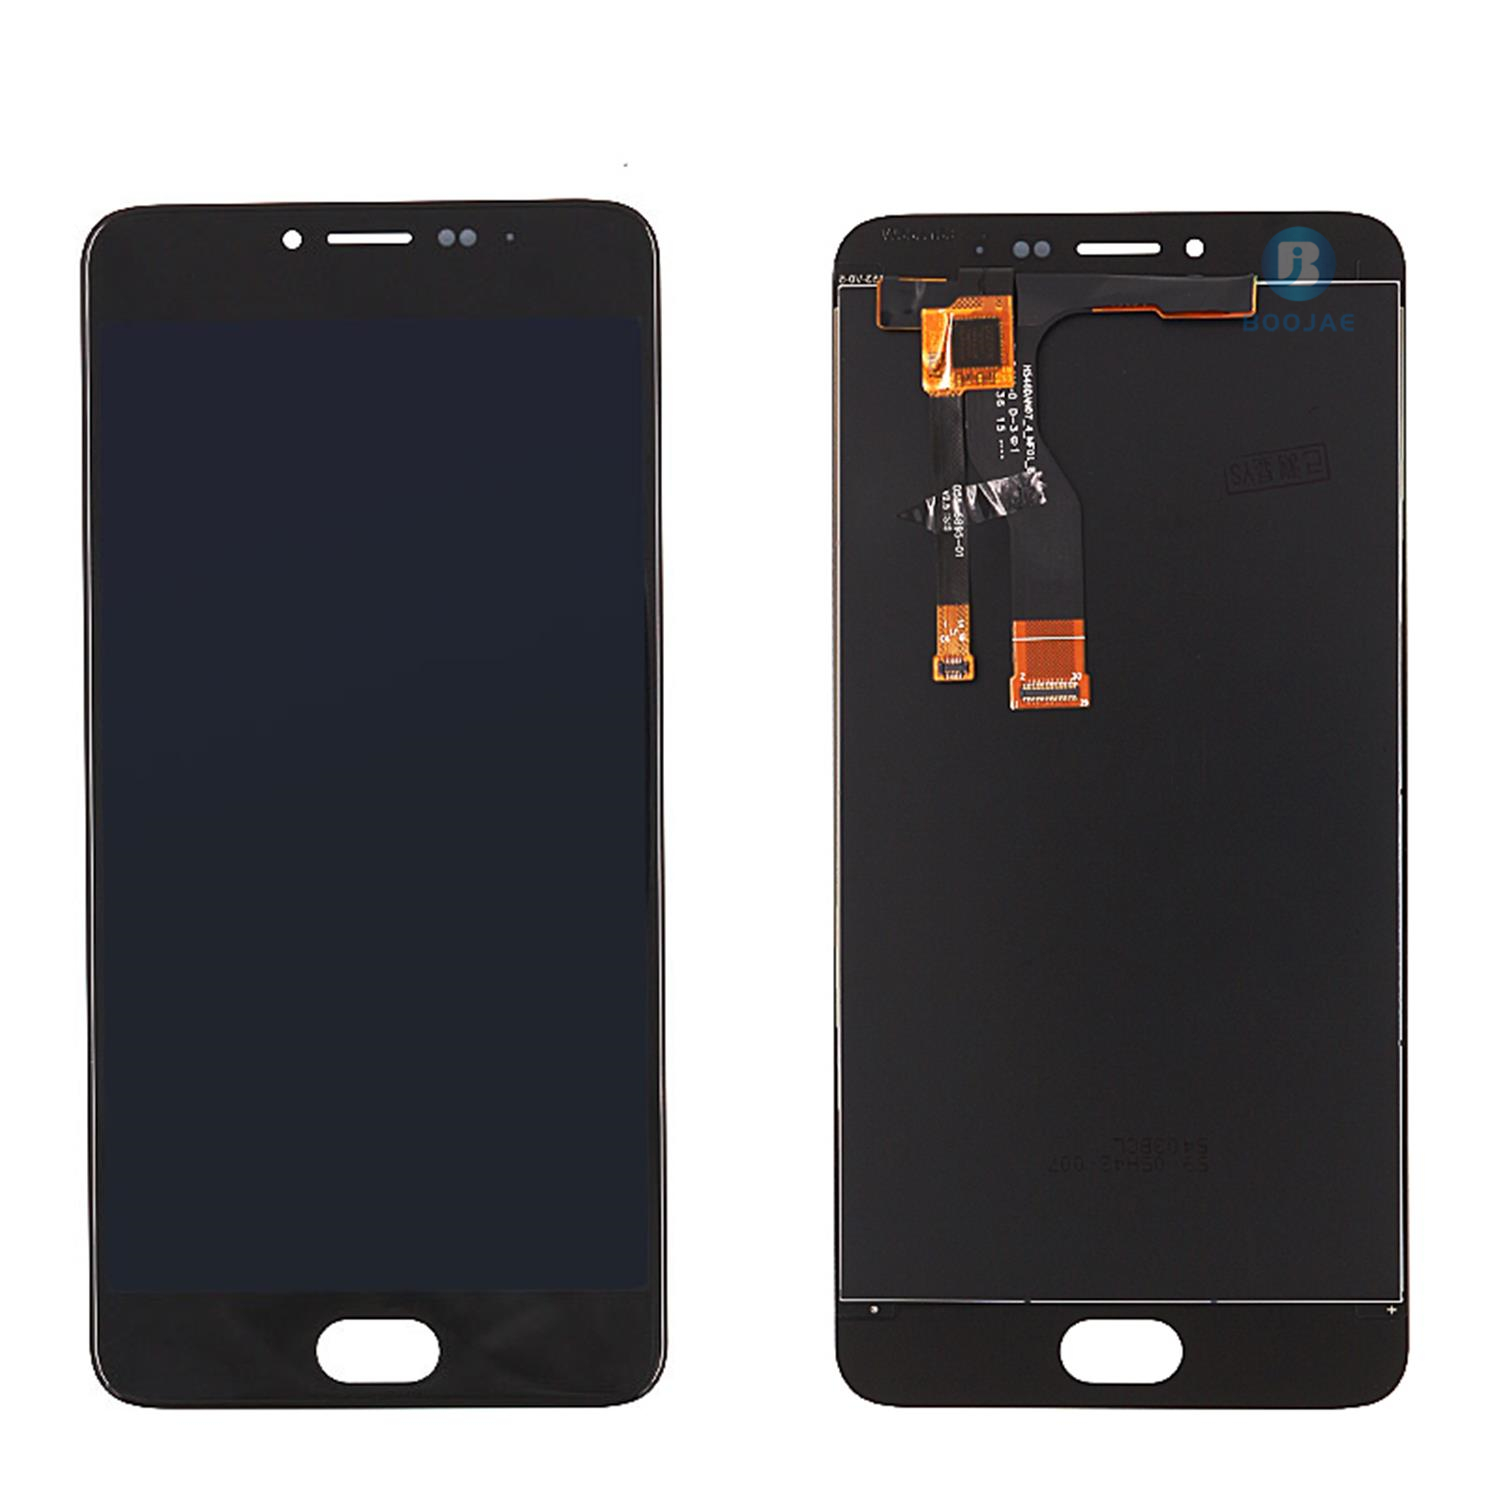 For Meizu Meilan Note 3 LCD Screen Display and Touch Panel Digitizer Assembly Replacement